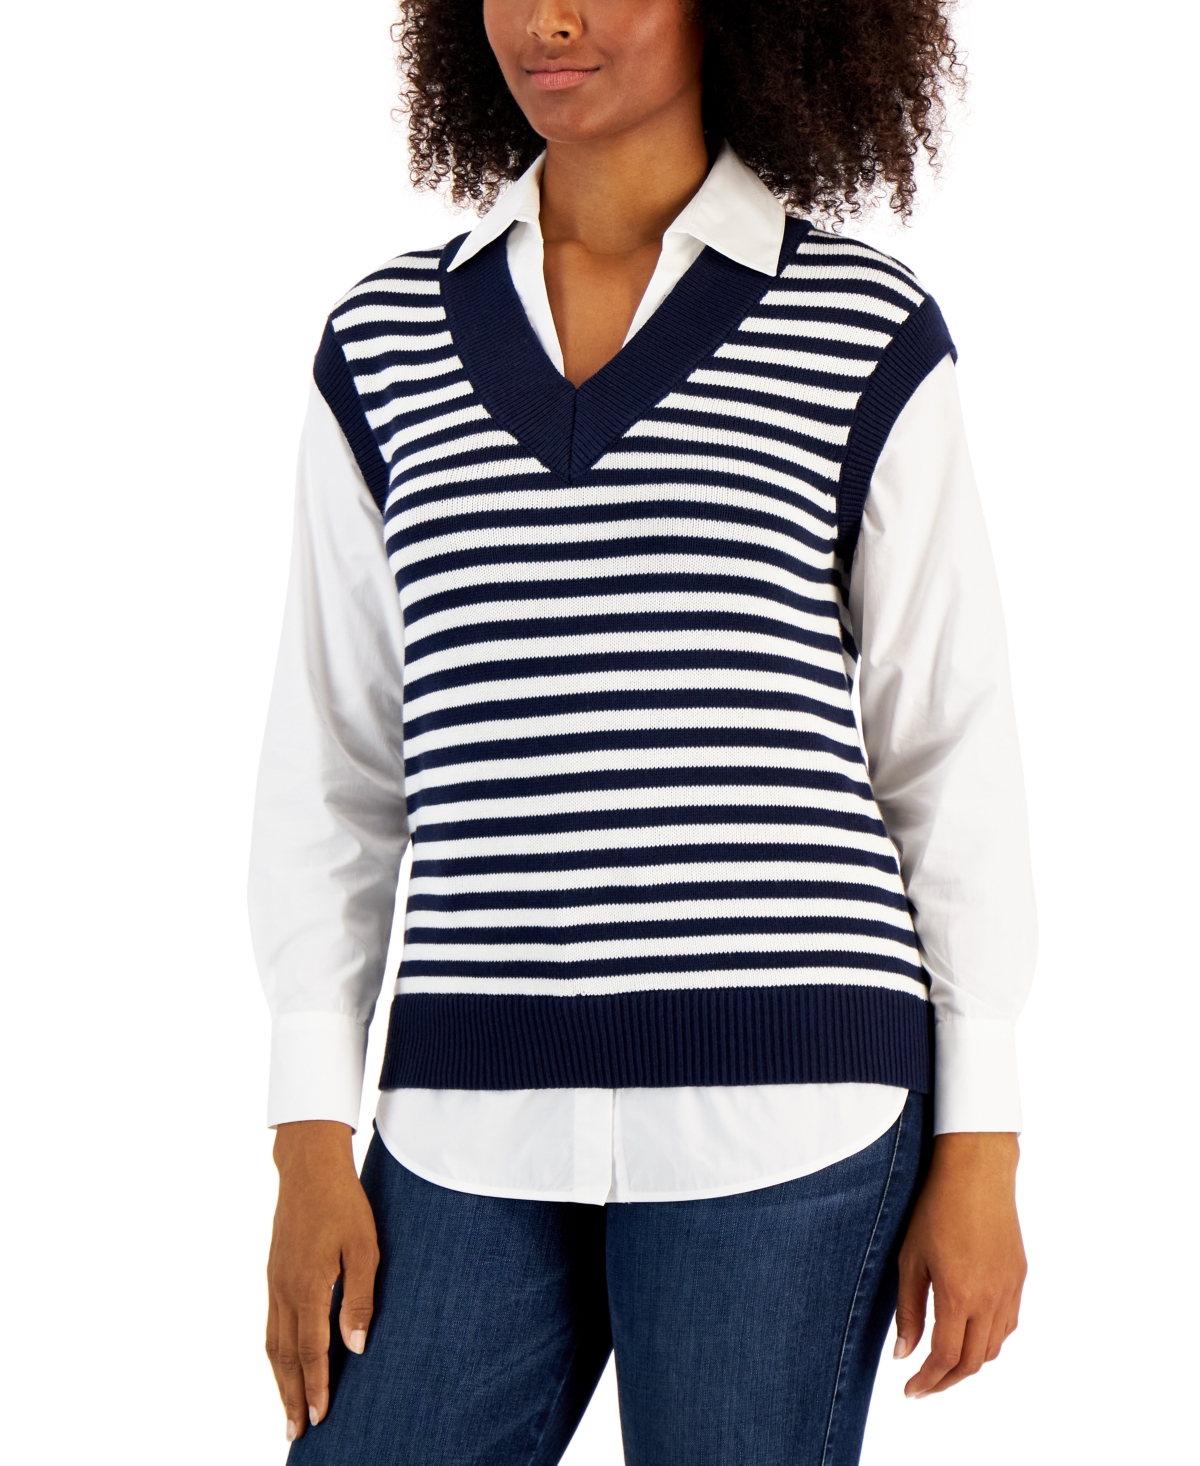 Charter Club Women's Layered Sweater Vest Shirt, Created for Macy's